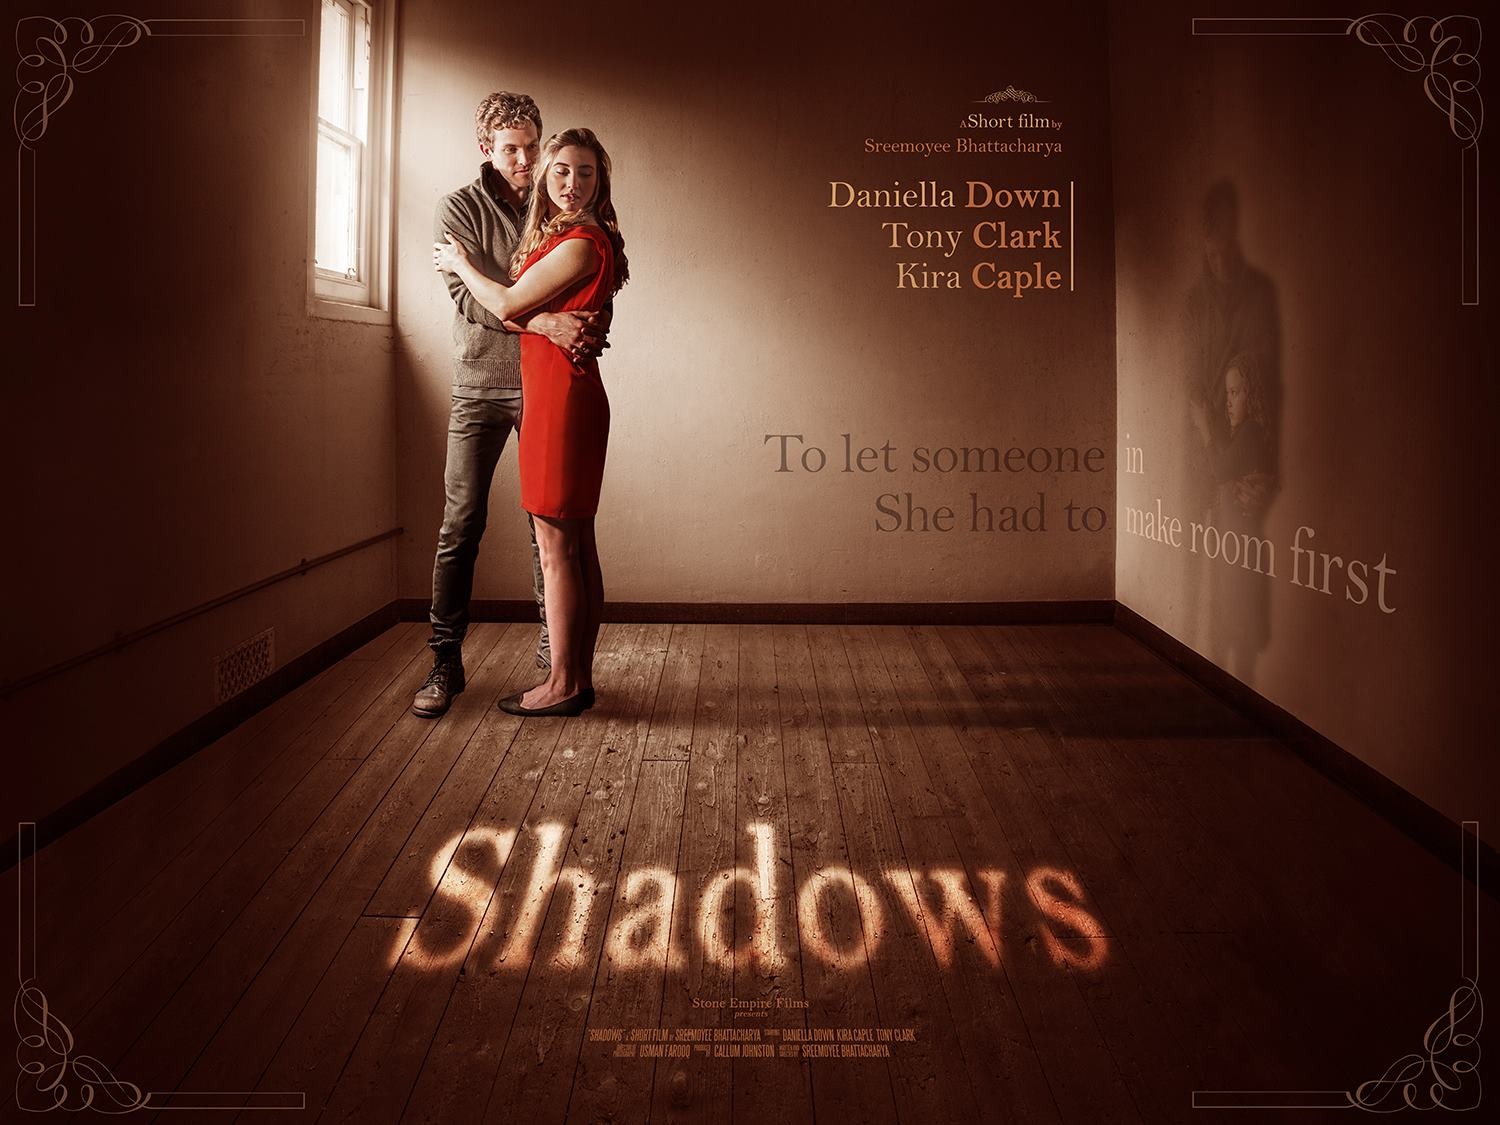 Extra Large Movie Poster Image for Shadows